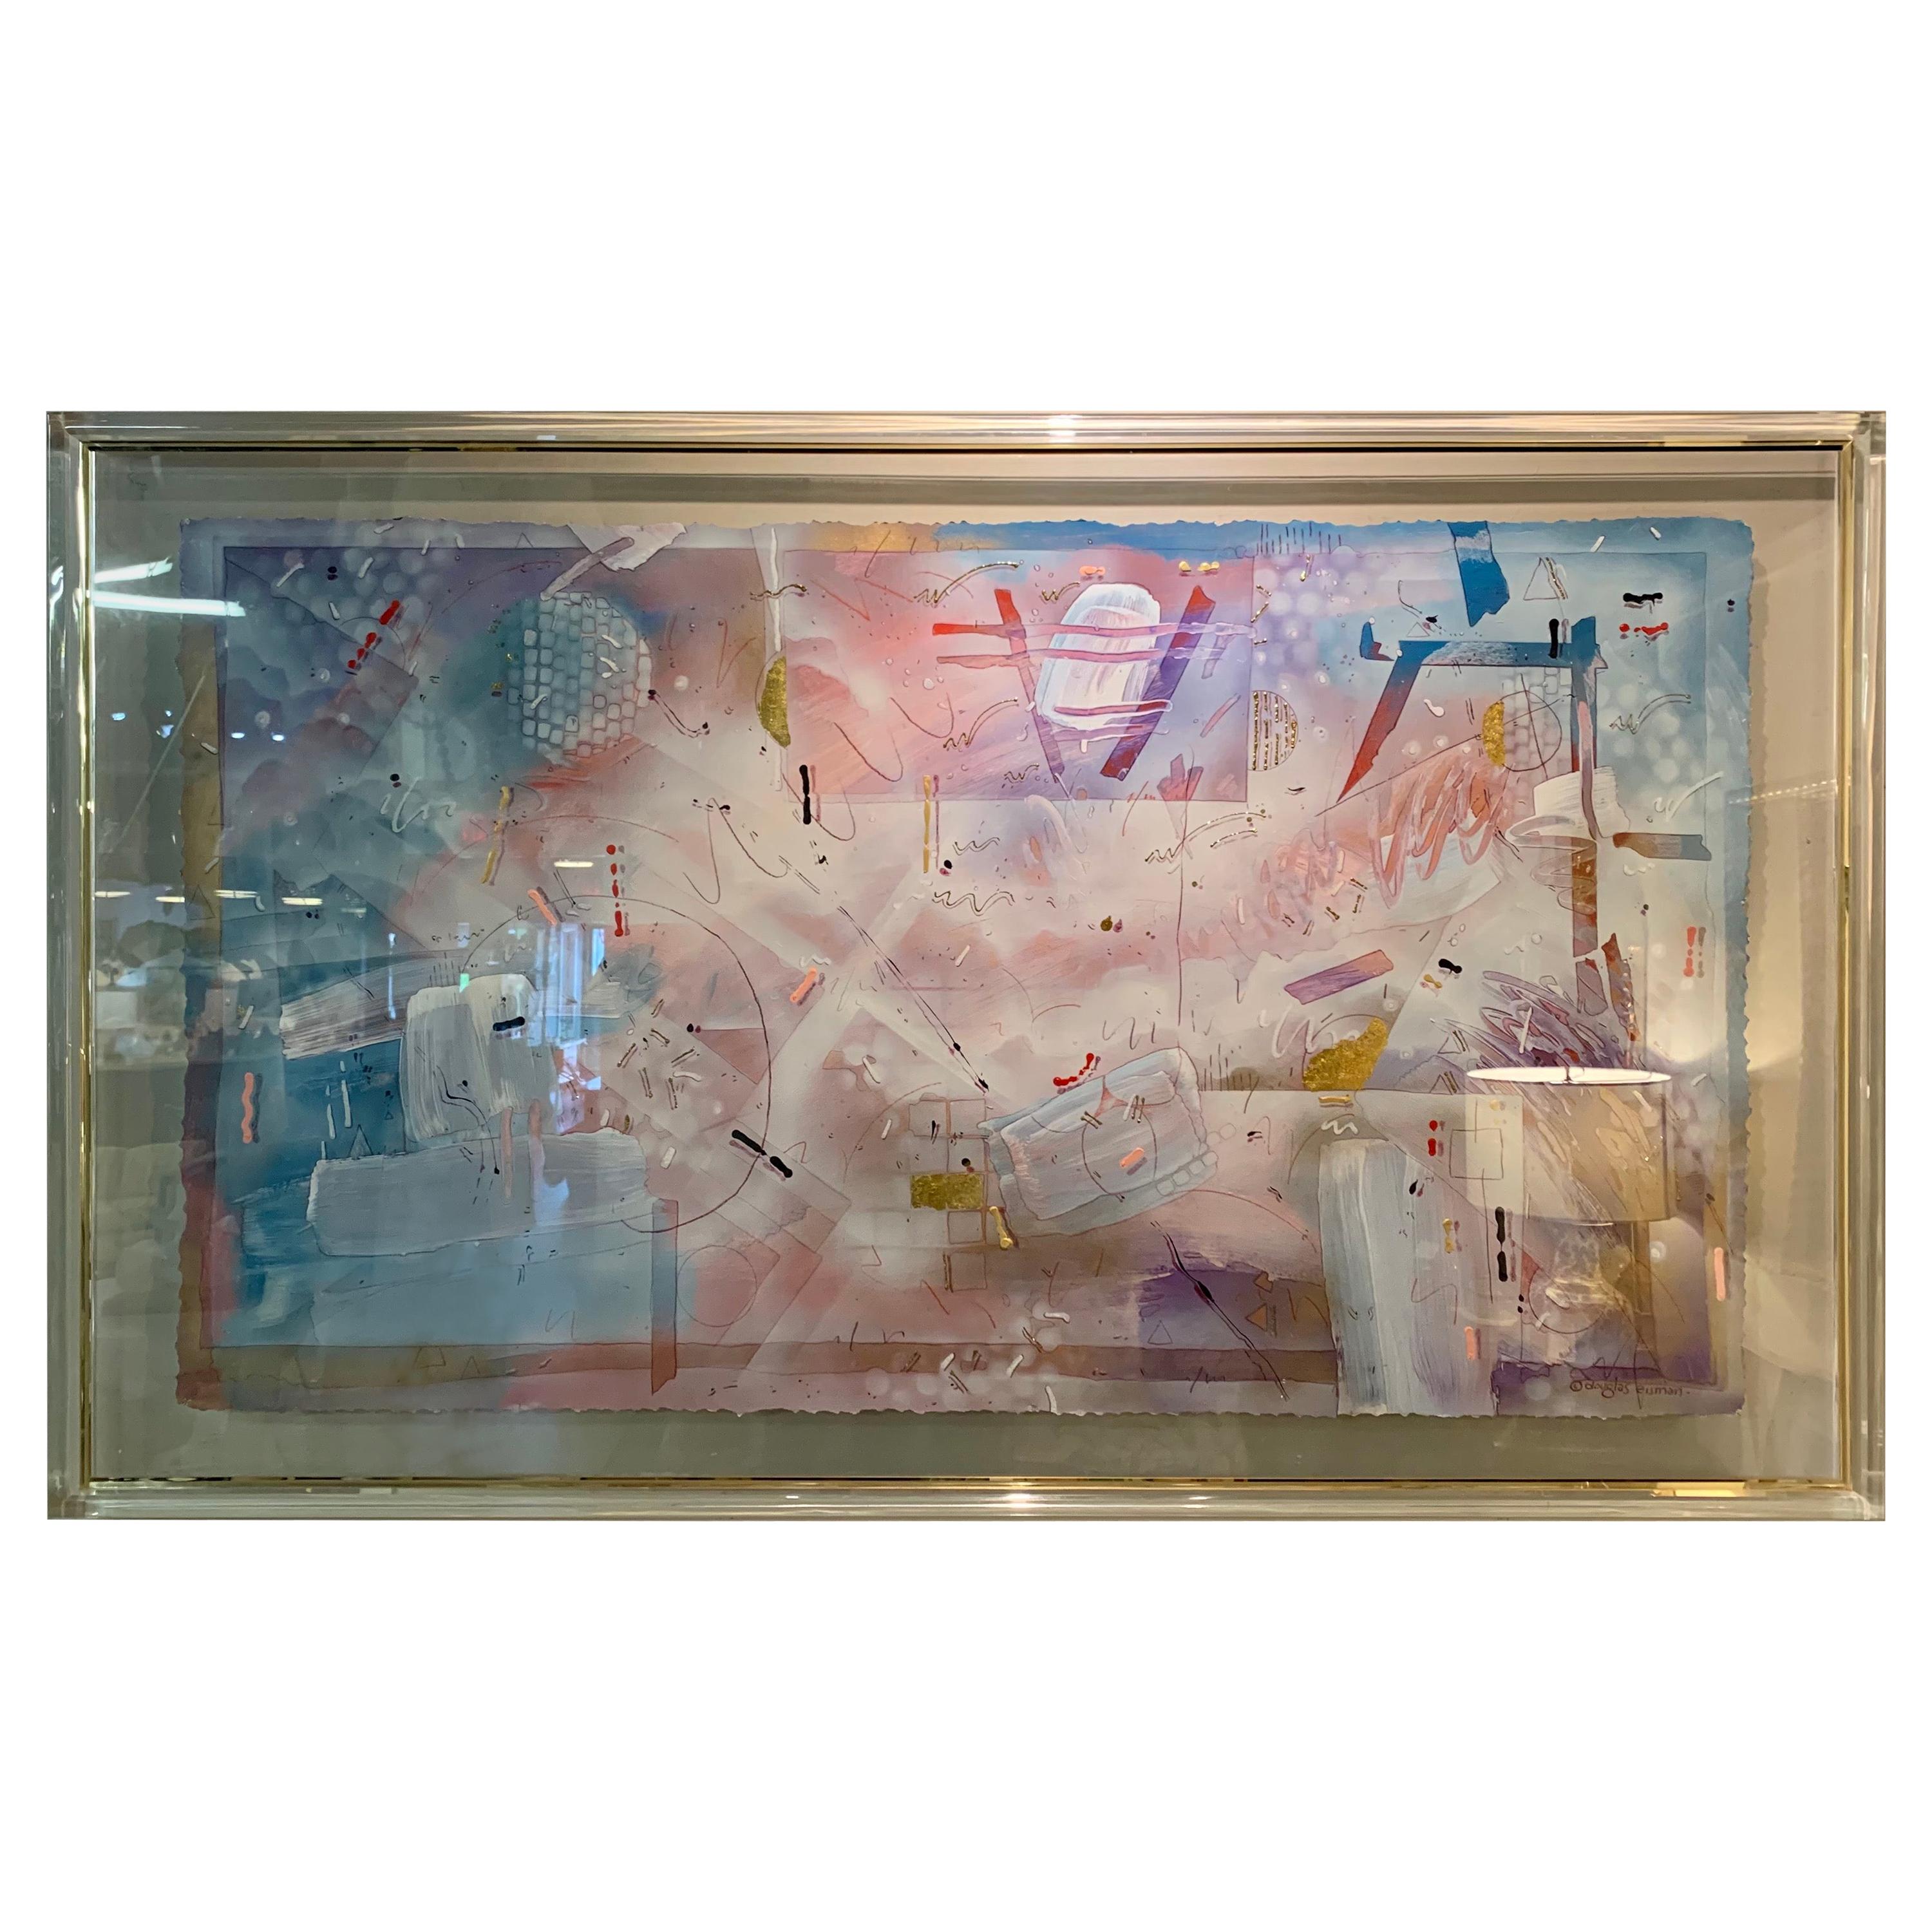 Immense Original Signed Douglas Eisman Signed Painting in Lucite and Brass Frame